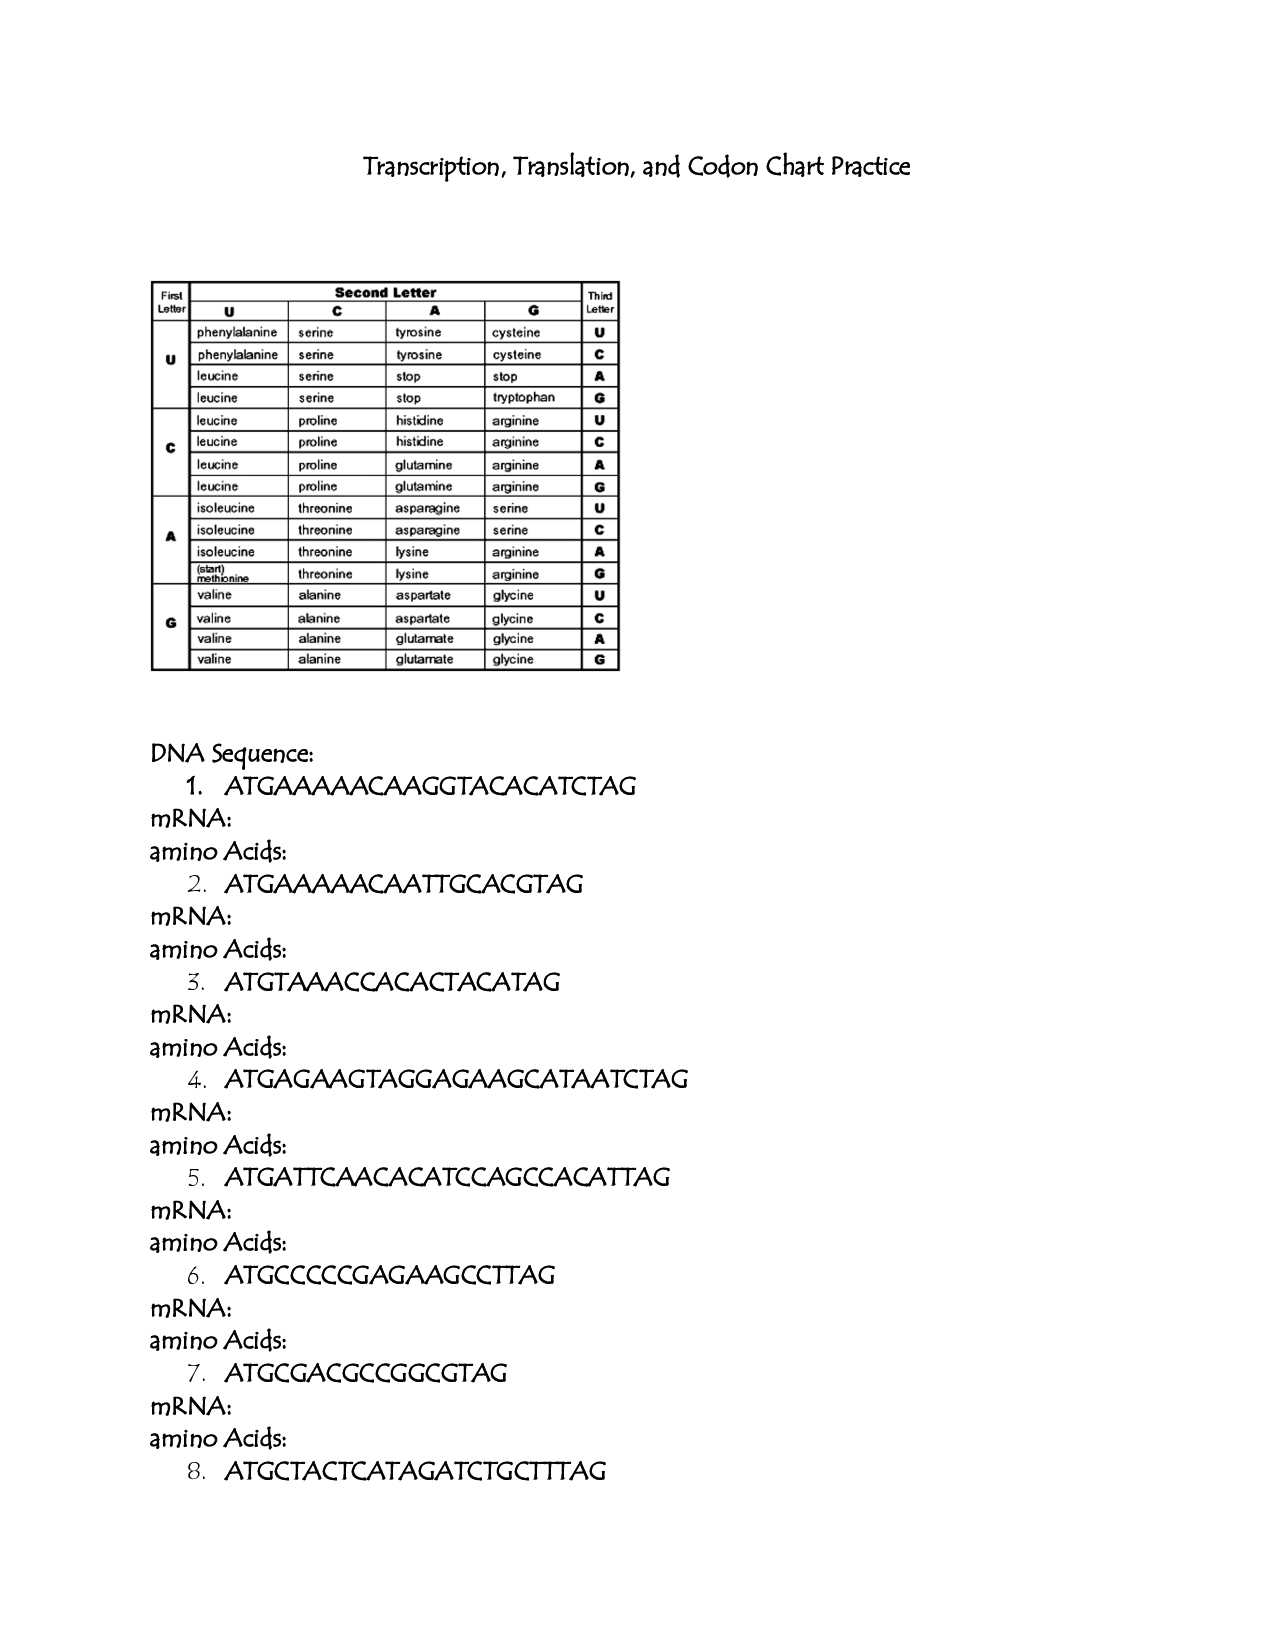 Dna Replication Worksheet Pdf Along with Codon Worksheet Answers Choice Image Worksheet for Kids Maths Printing